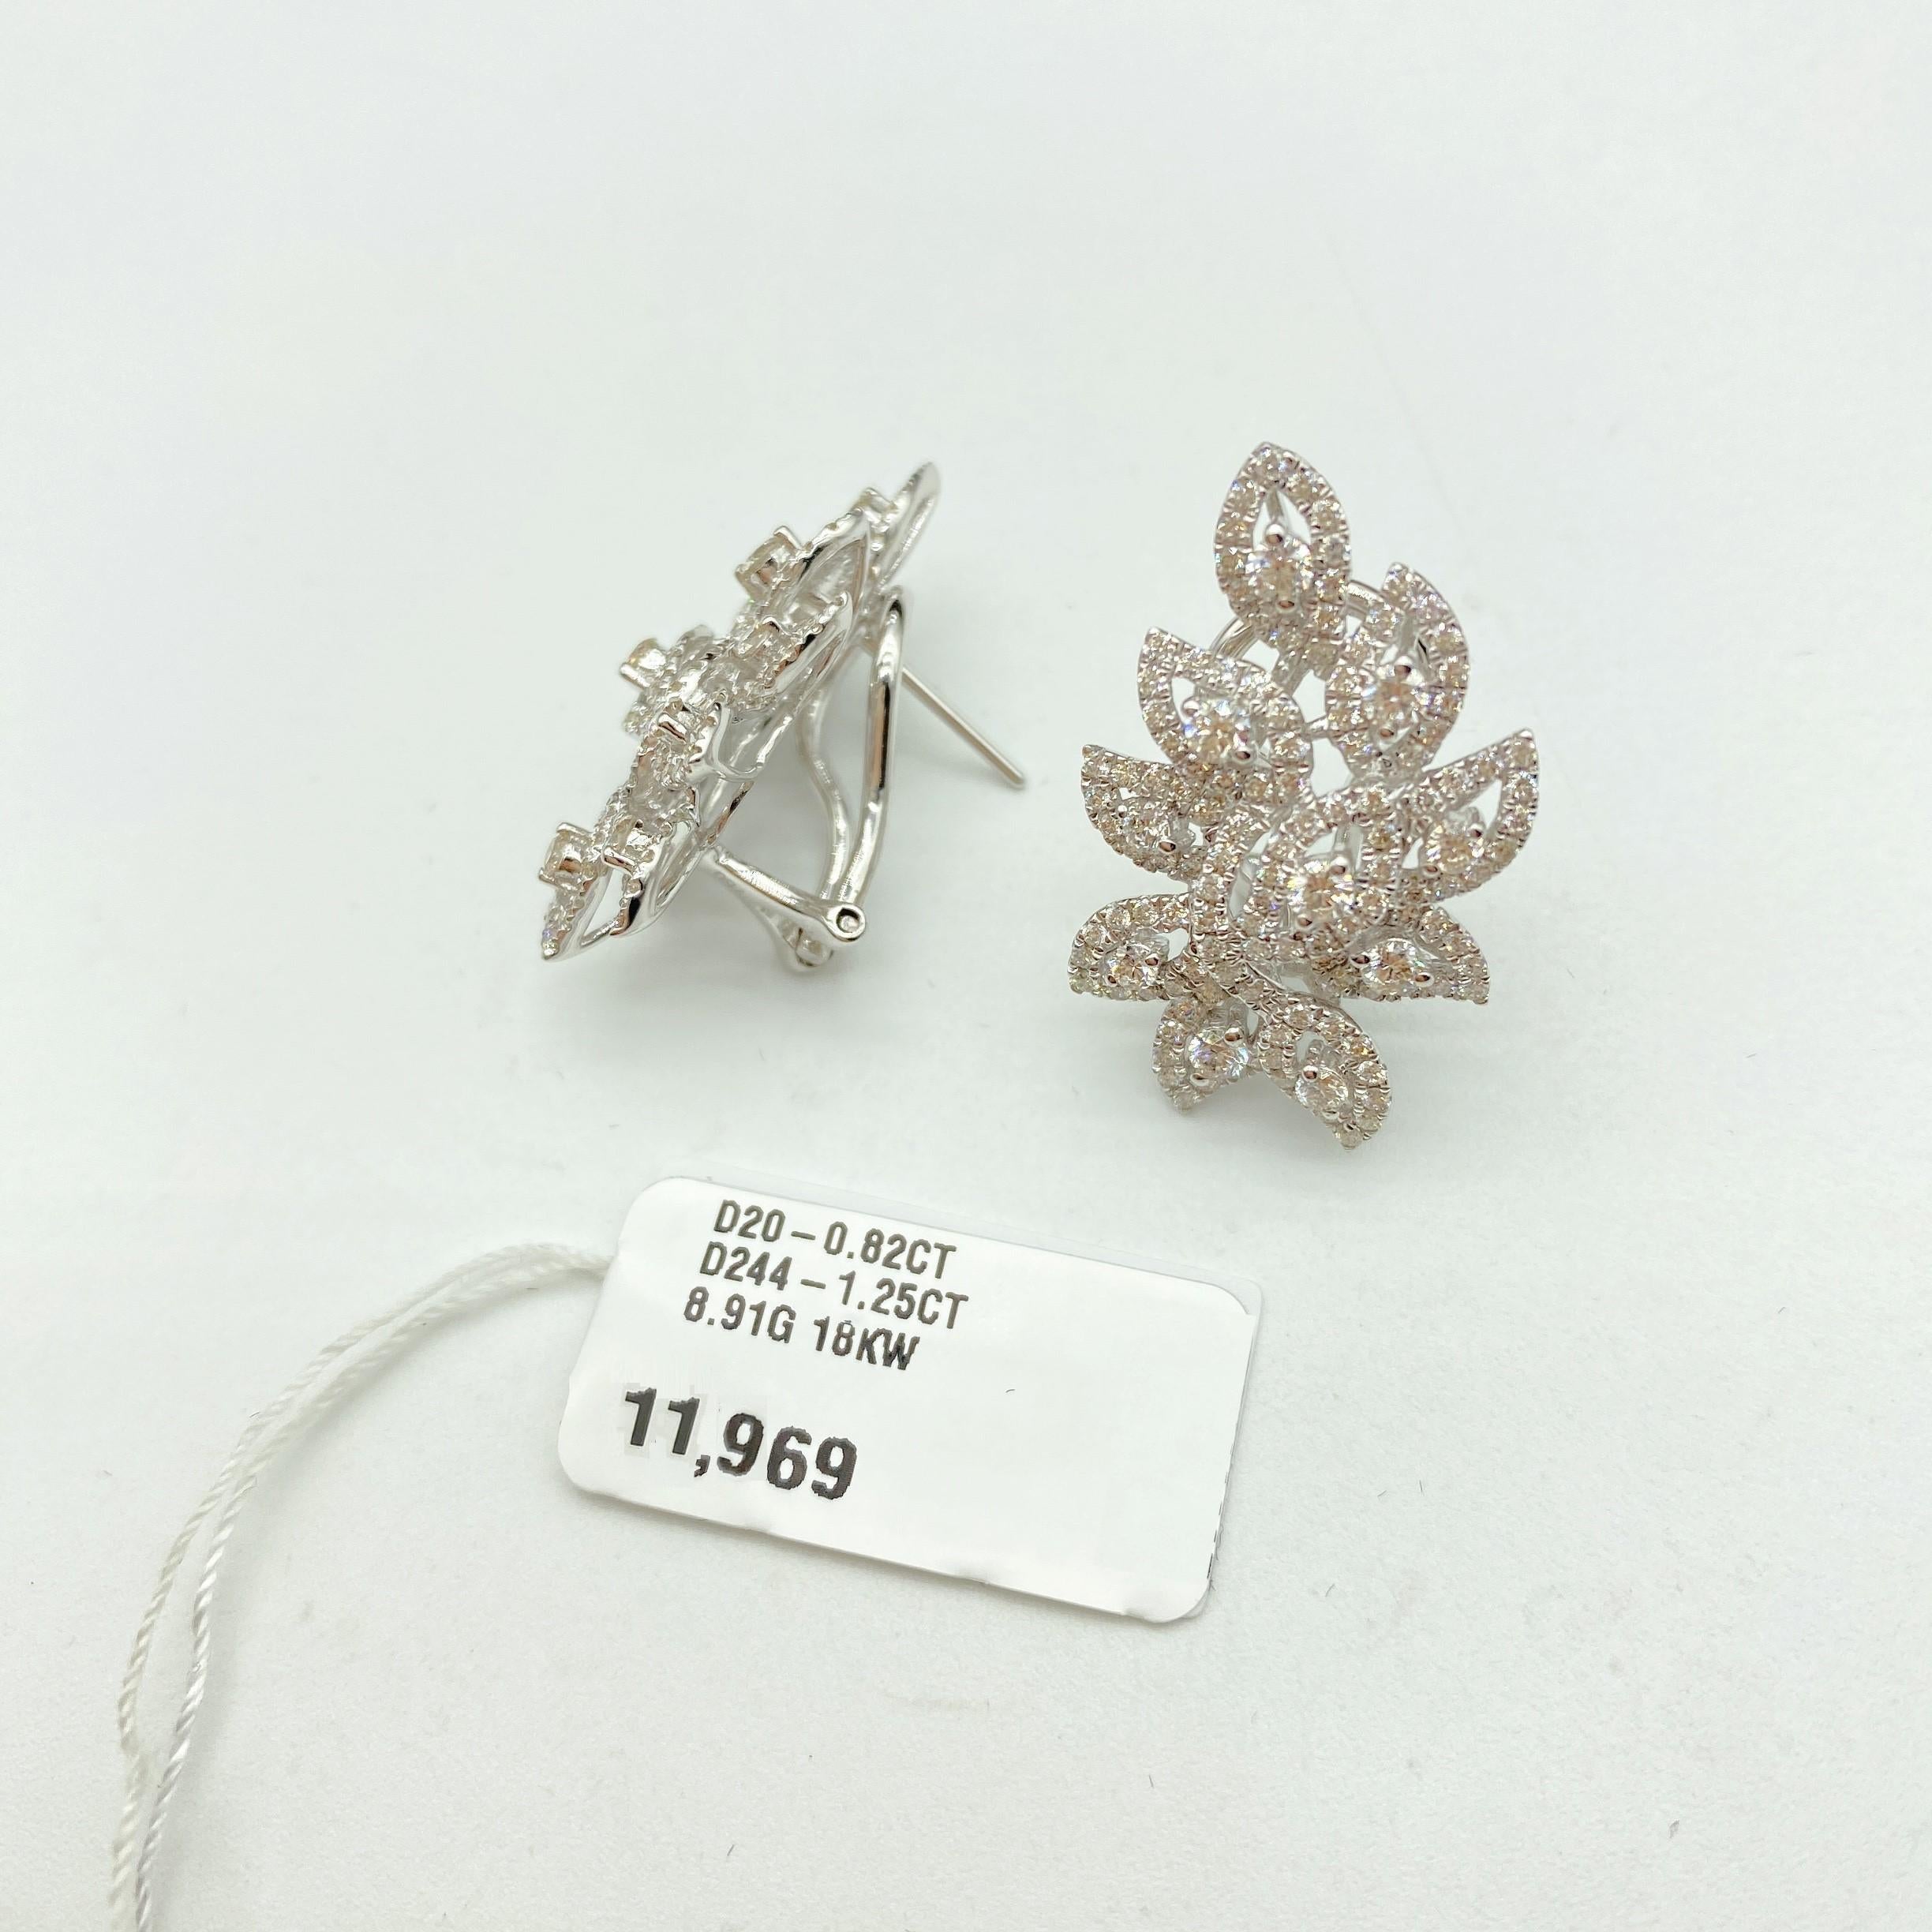 NWT $11, 969 18KT Gold Rare Fancy Gorgeous Glittering Leaf Diamond Earrings In New Condition For Sale In New York, NY